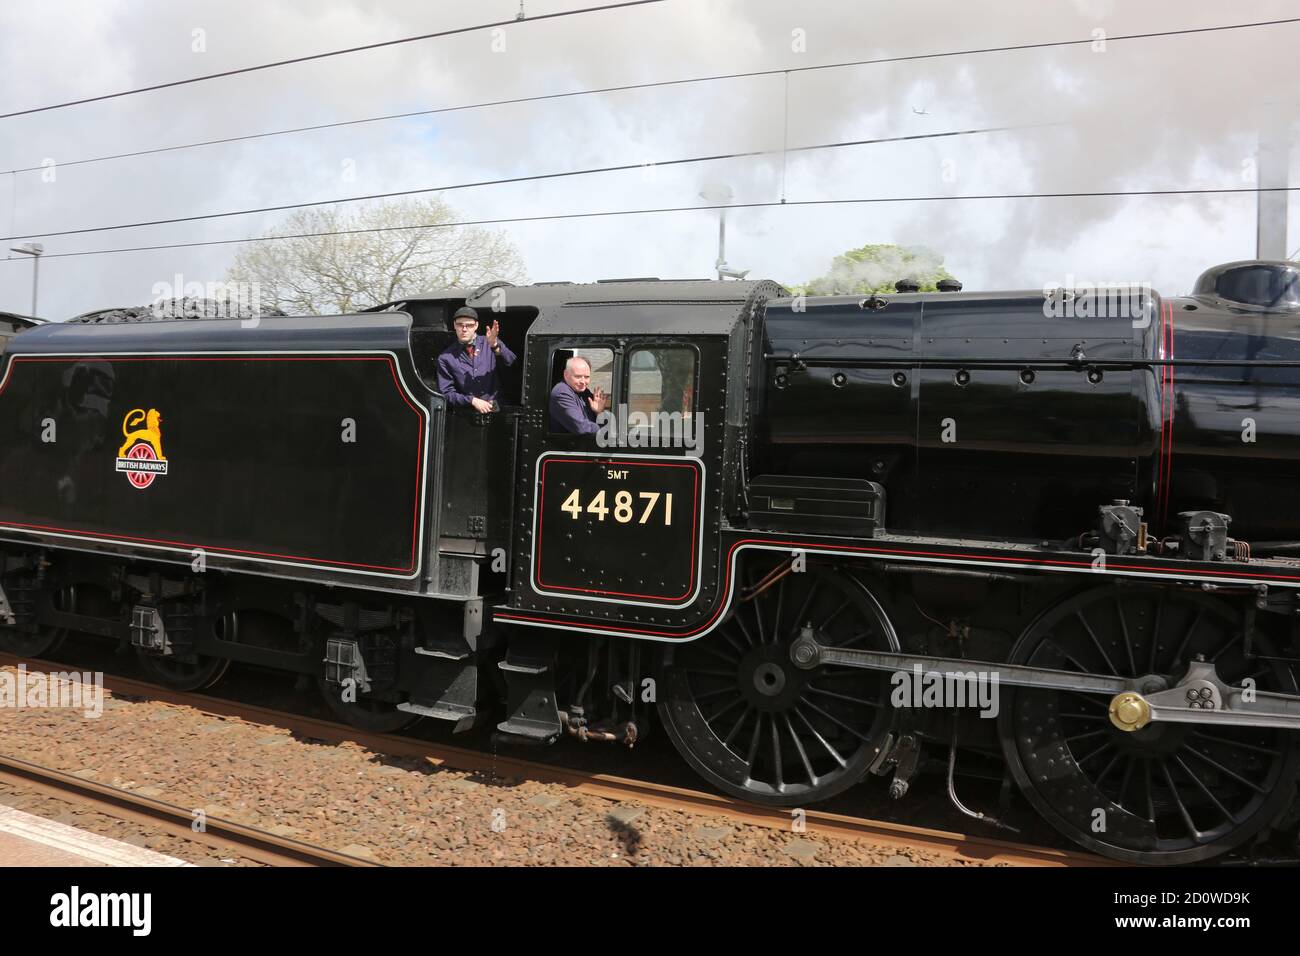 Ayr ,02 May 2019. Rail Tour with Steam engiine travelling through Newton on Ayr station, Ayr, Ayrshire, Scotland. The Great Britain X11 on head board. LMS Black Five 44871 driver waving from the cab footplate Stock Photo